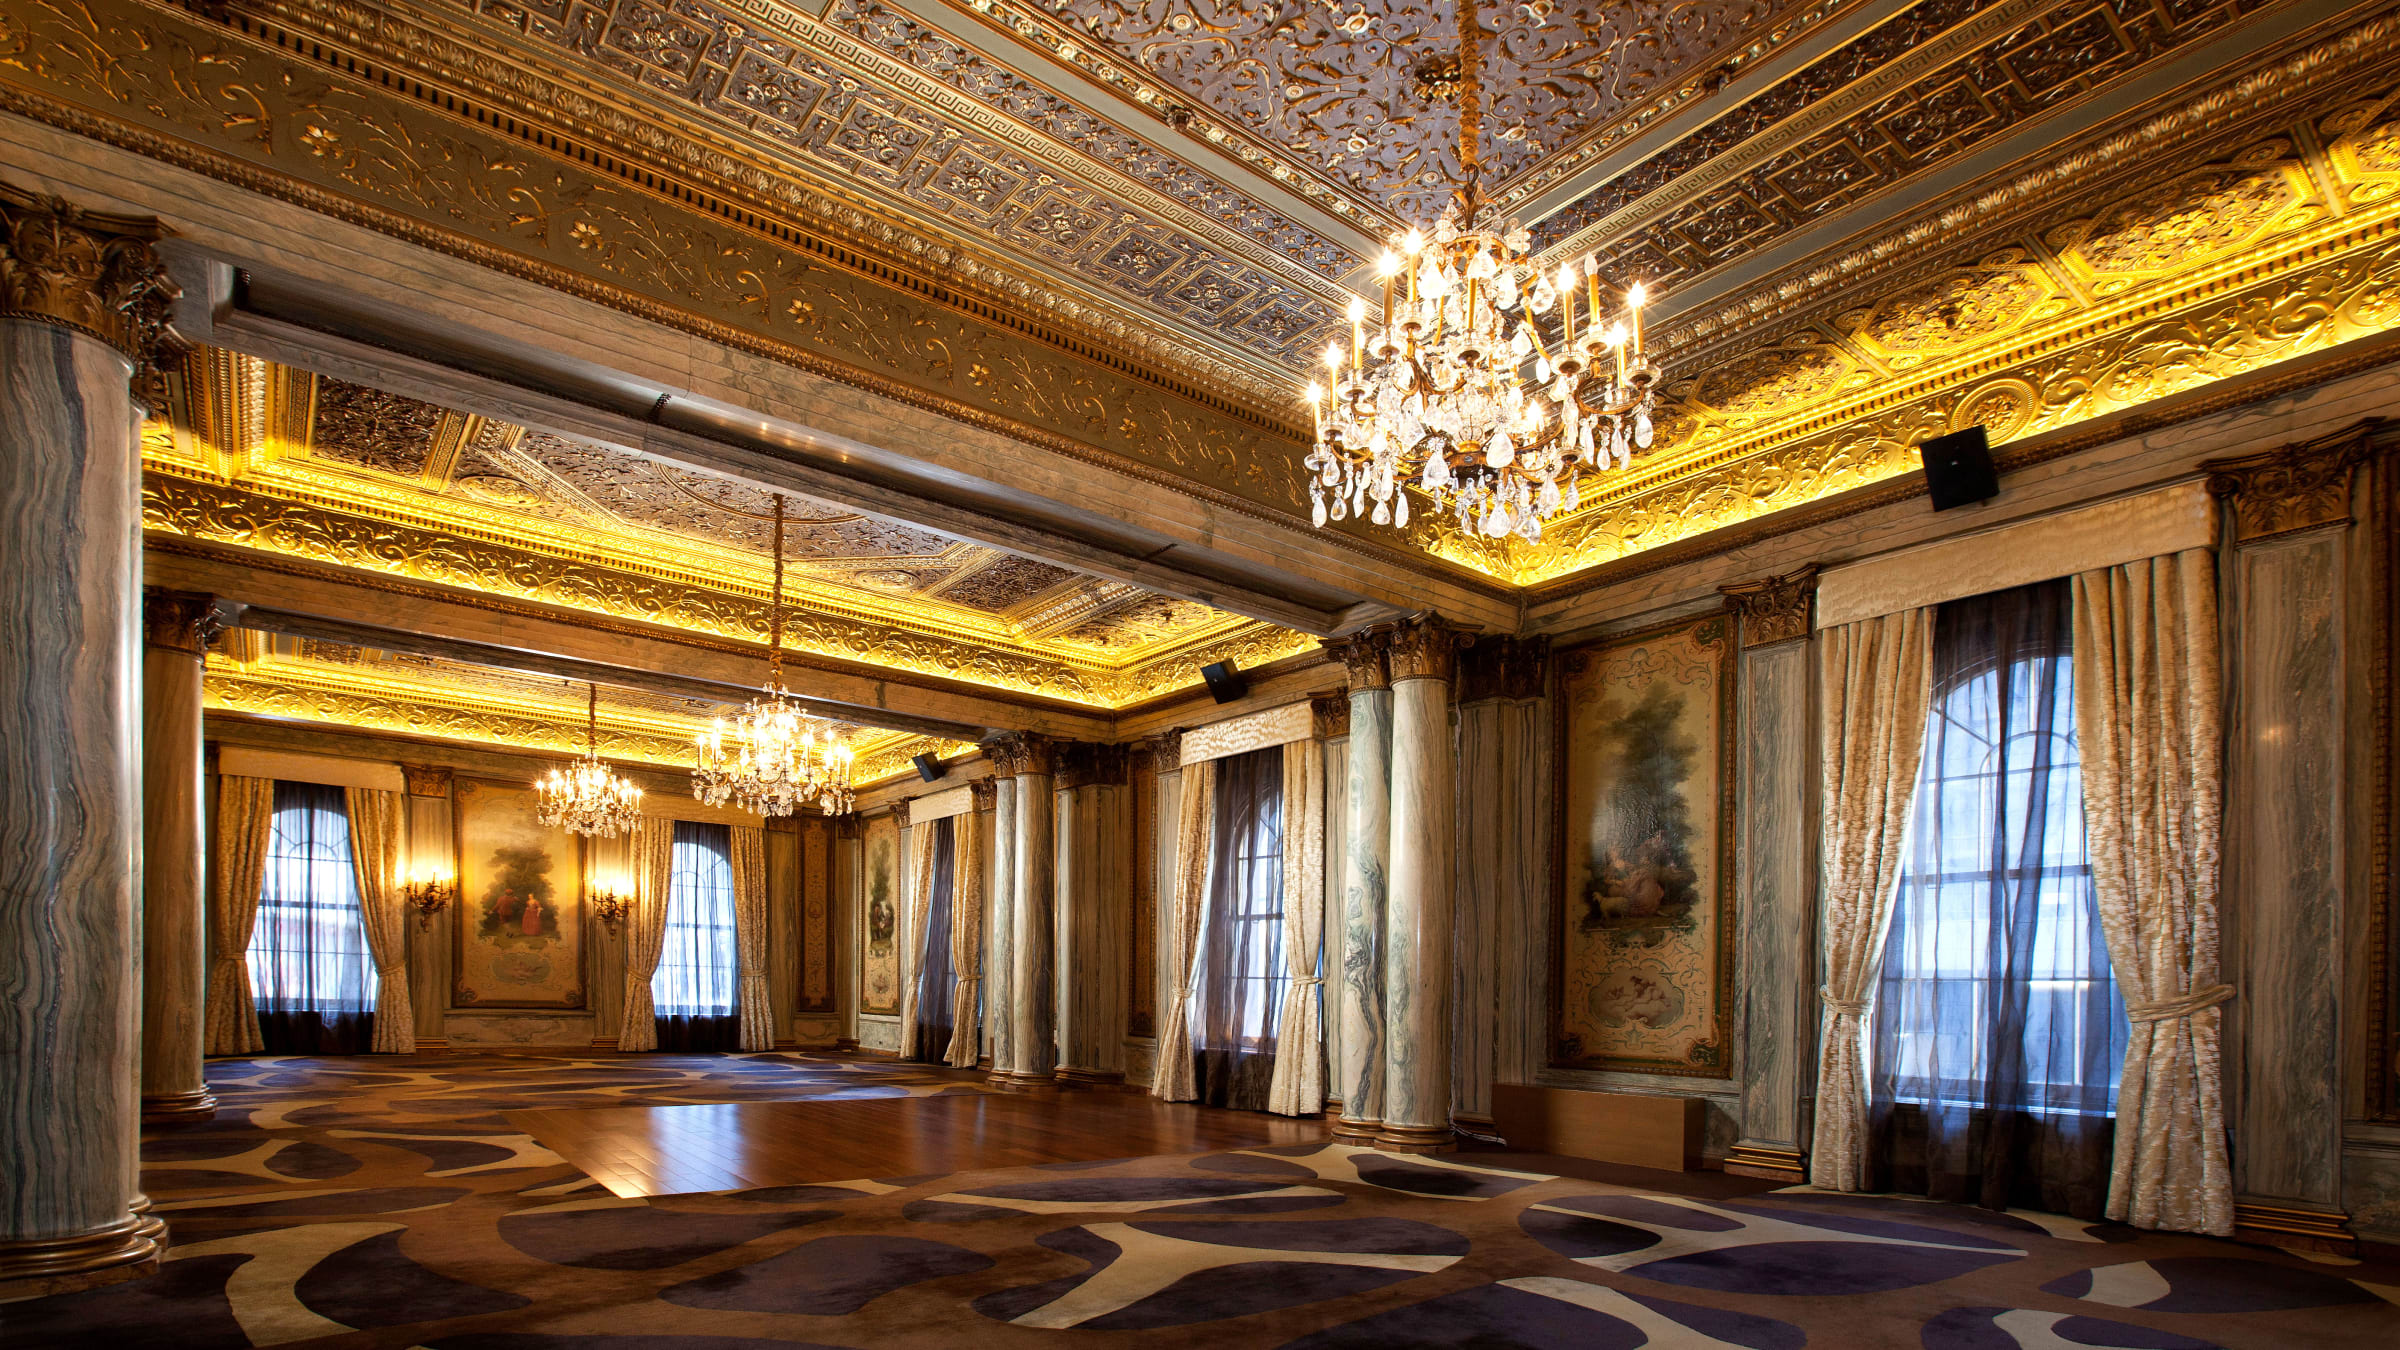 Villard House, the NYC Mansion of Doomed Railroad Tycoon, Now Open for Tours by Lotte New York Palace Hotel picture photo photo